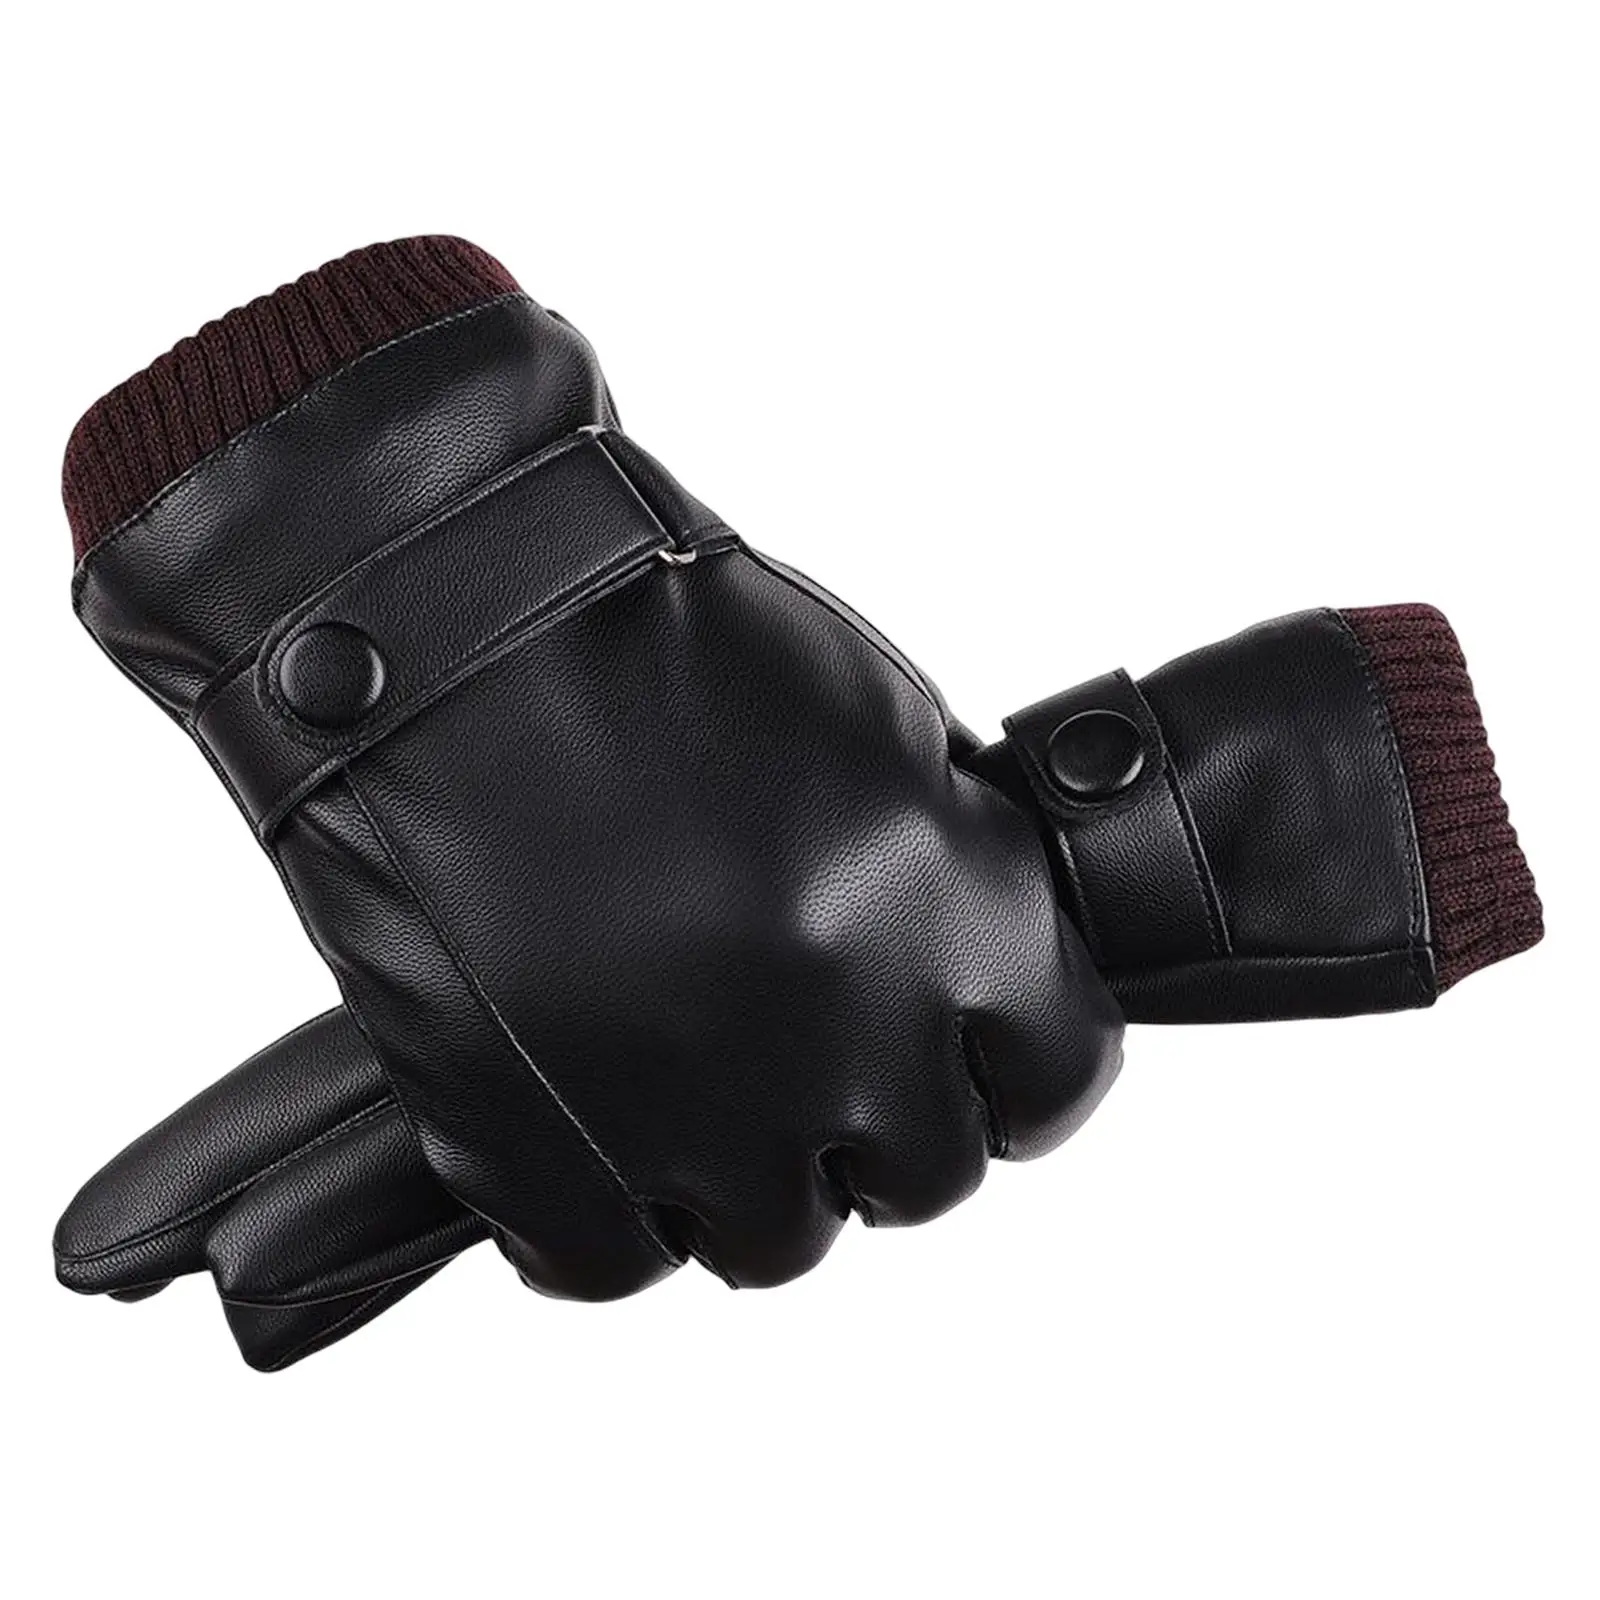 Winter Gloves PU Leather Snow Touchscreen Soft Autumn Winter for Cycling